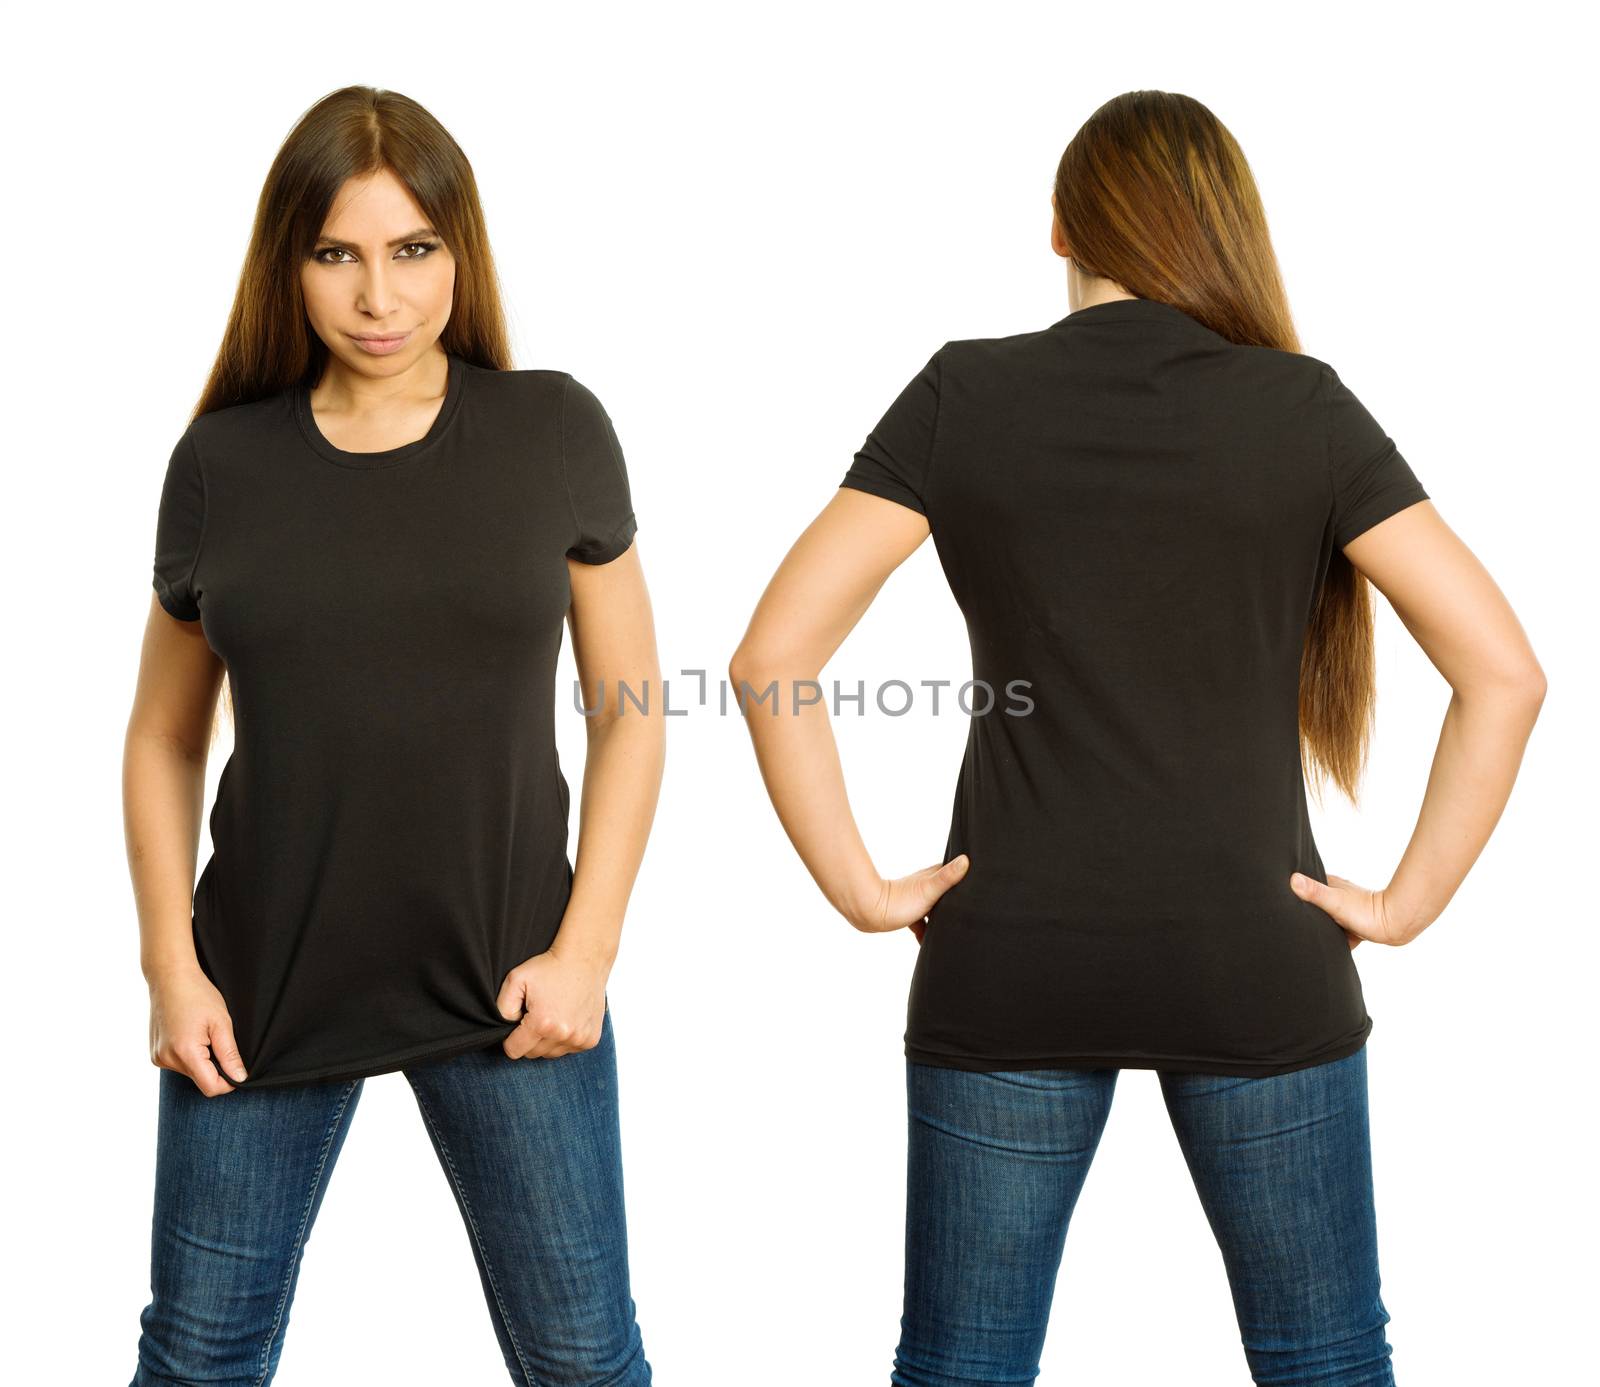 Young beautiful brunette woman with blank black shirt, front and back. Ready for your design or artwork.
